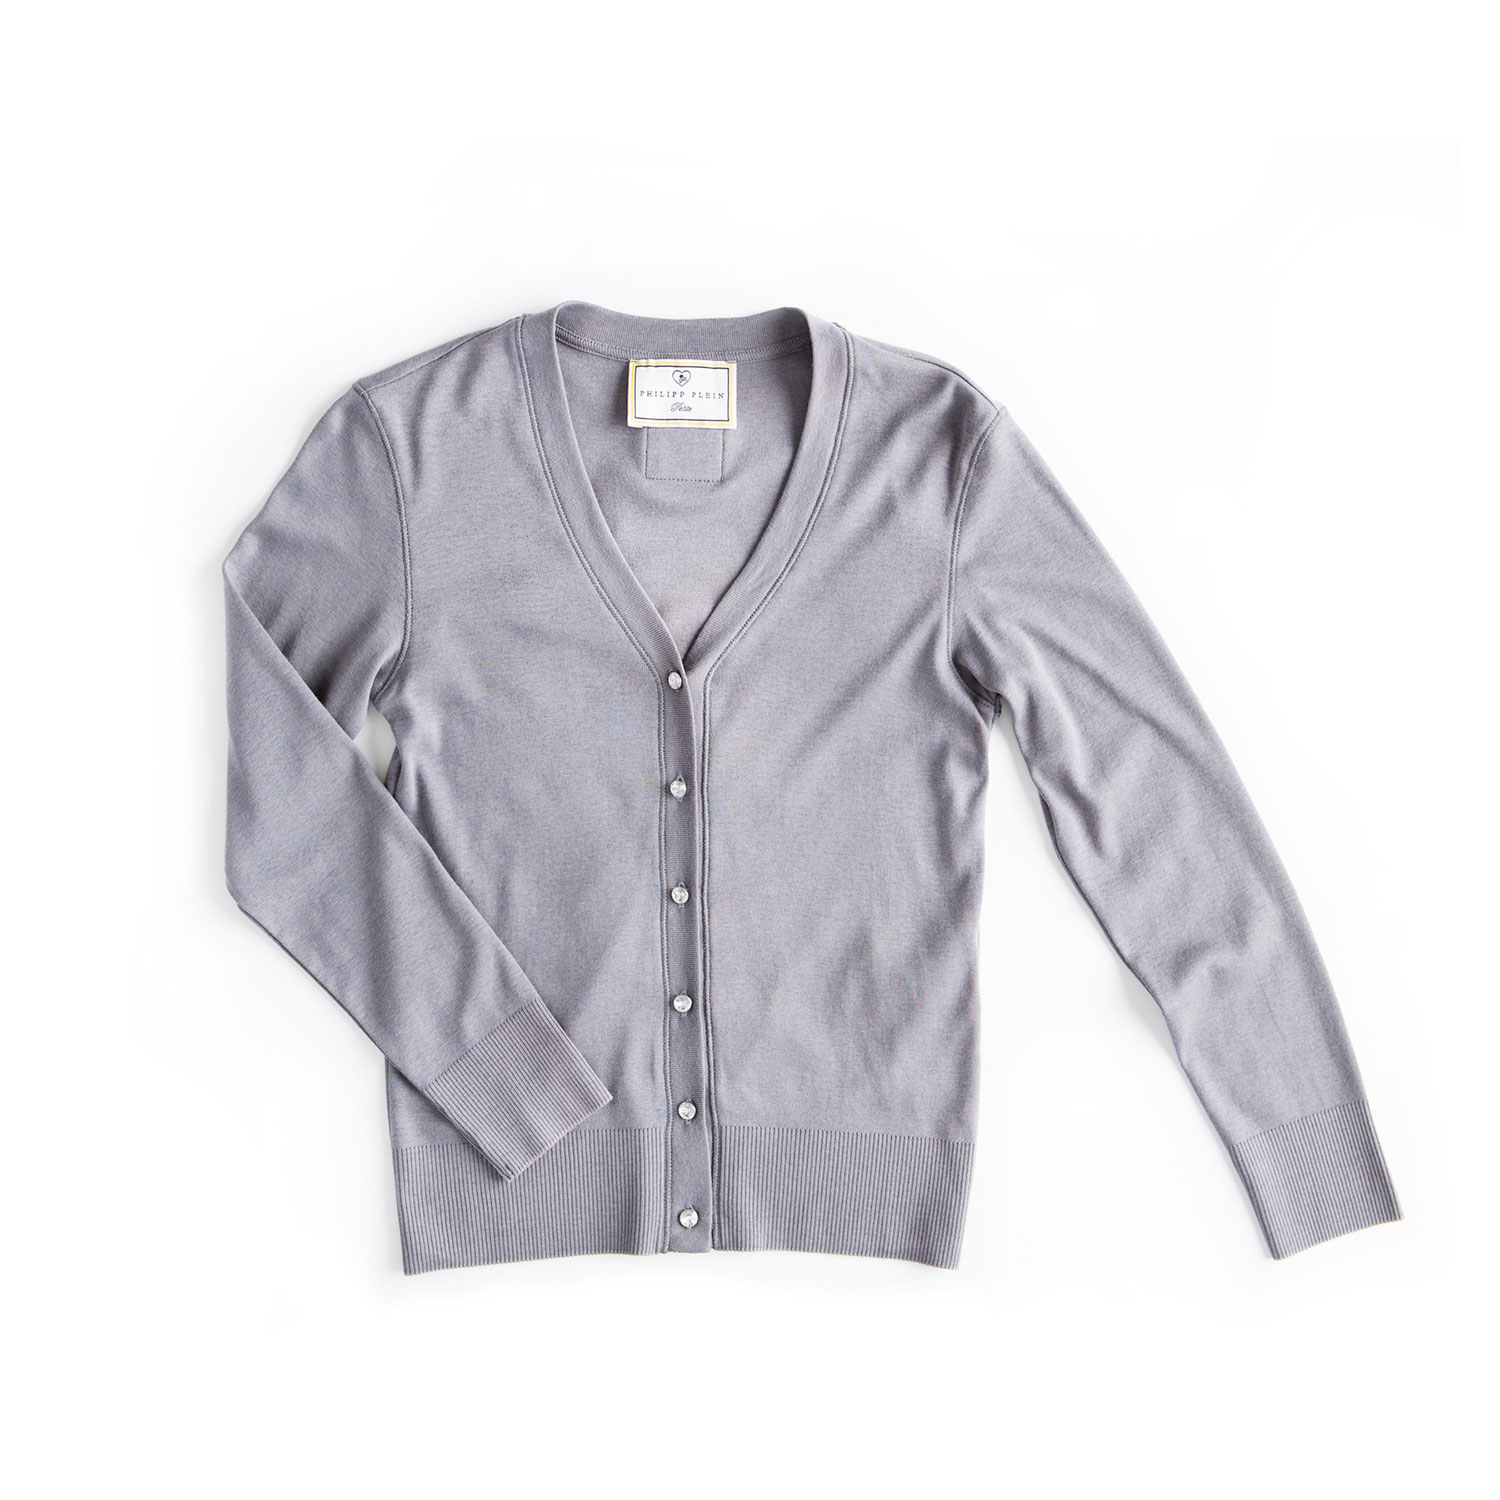 E Commerce Apparel Product Photography of Cardigan White Background Dallas Texas 